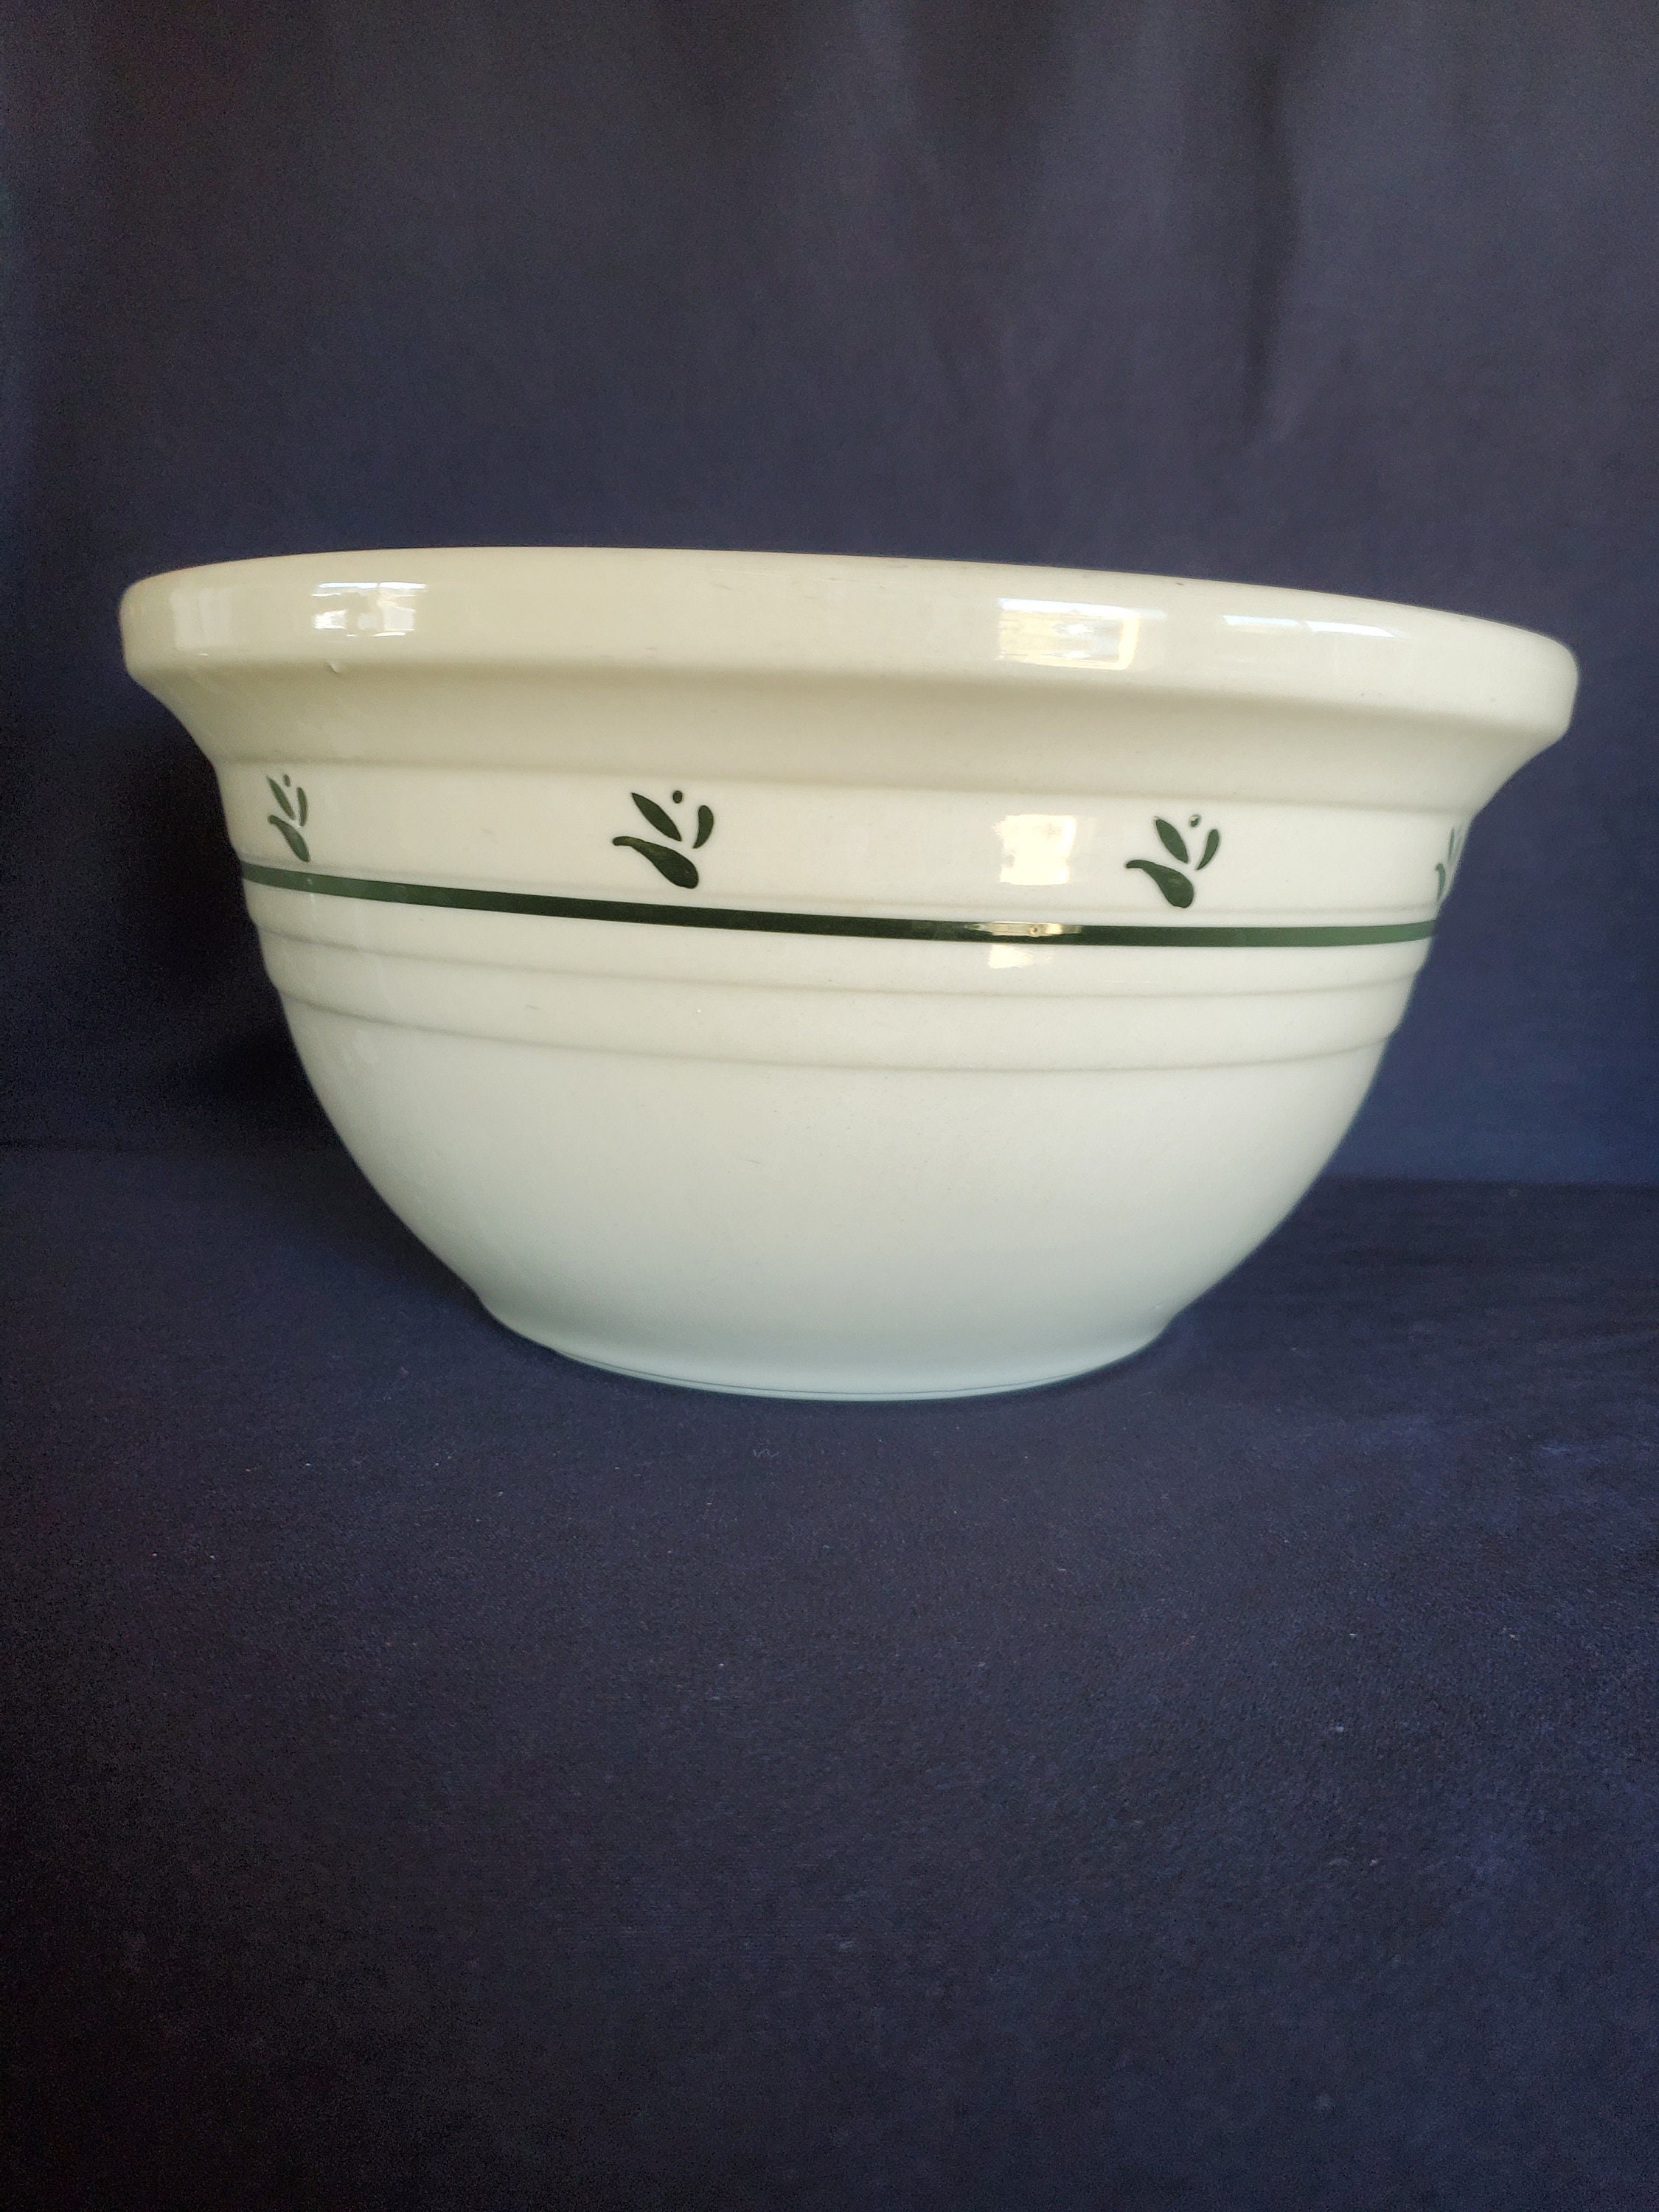 Friendship Bowl Roseville Ohio, 6 and 8 Quart Mixing Bowls, Bread Bowl,  Salad Bowl, Farmhouse Decor, OPEN STOCK, Sold Separately 